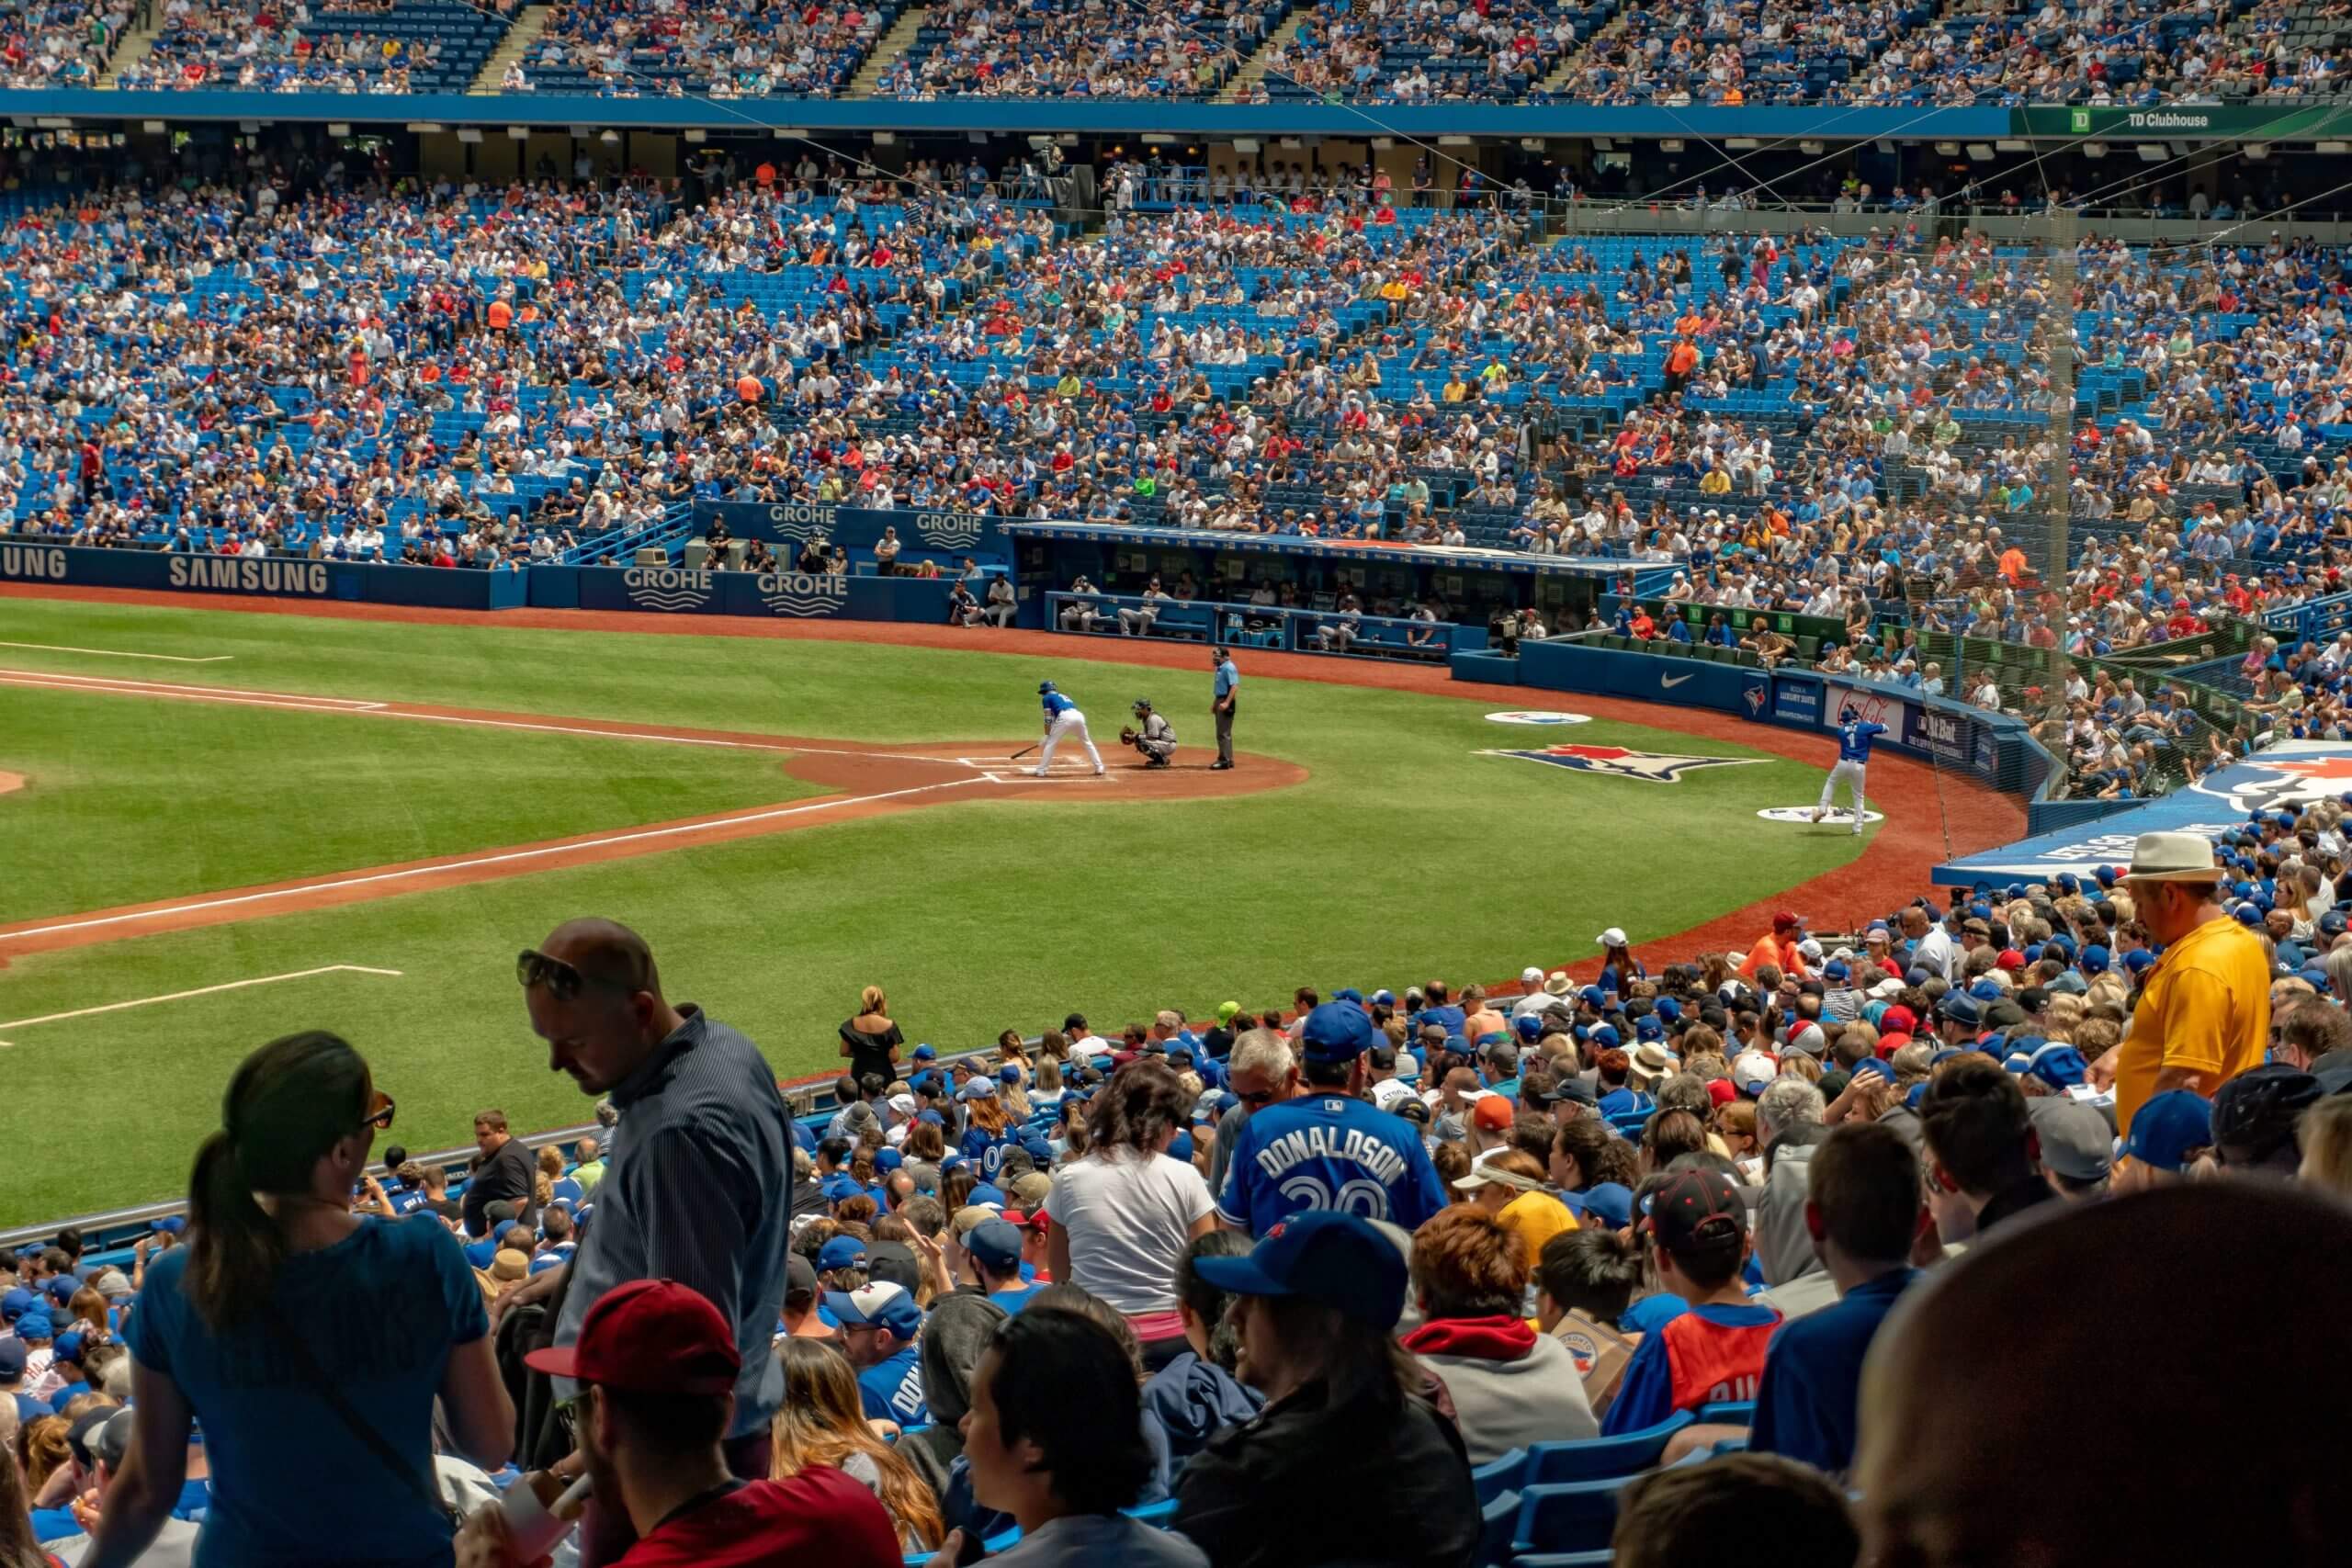 Image of the Toronto Blue Jays playing baseball at the Rogers Centre with a large crowd